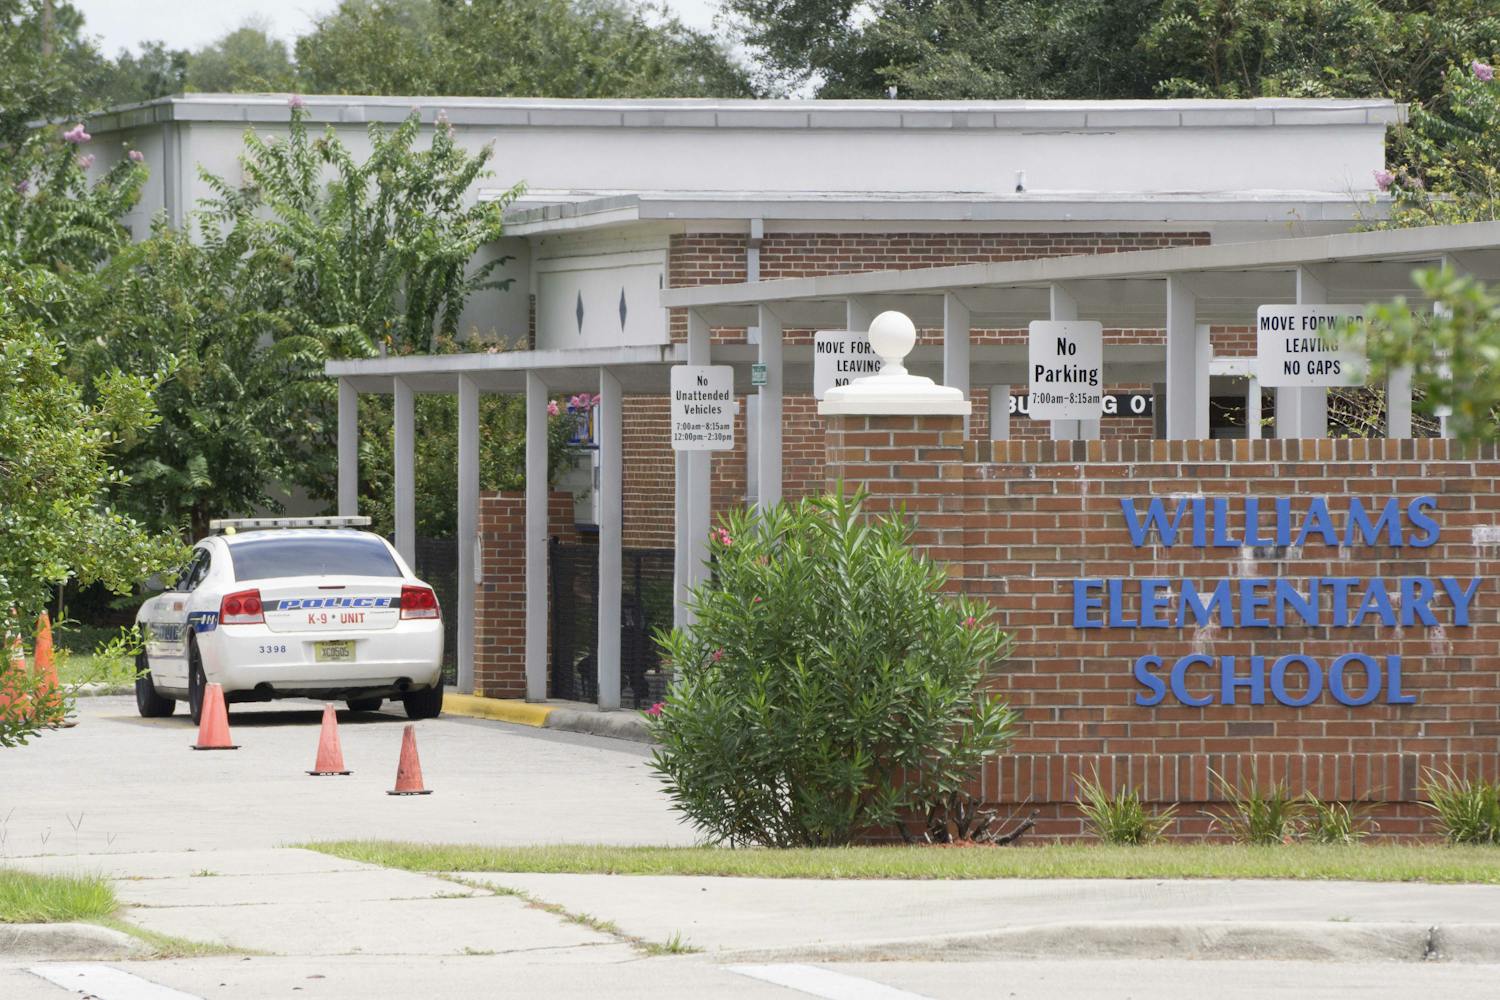 An Alachua County Sheriff's Office police car is stationed outside Joseph Williams Elementary School Aug. 28, 2015.